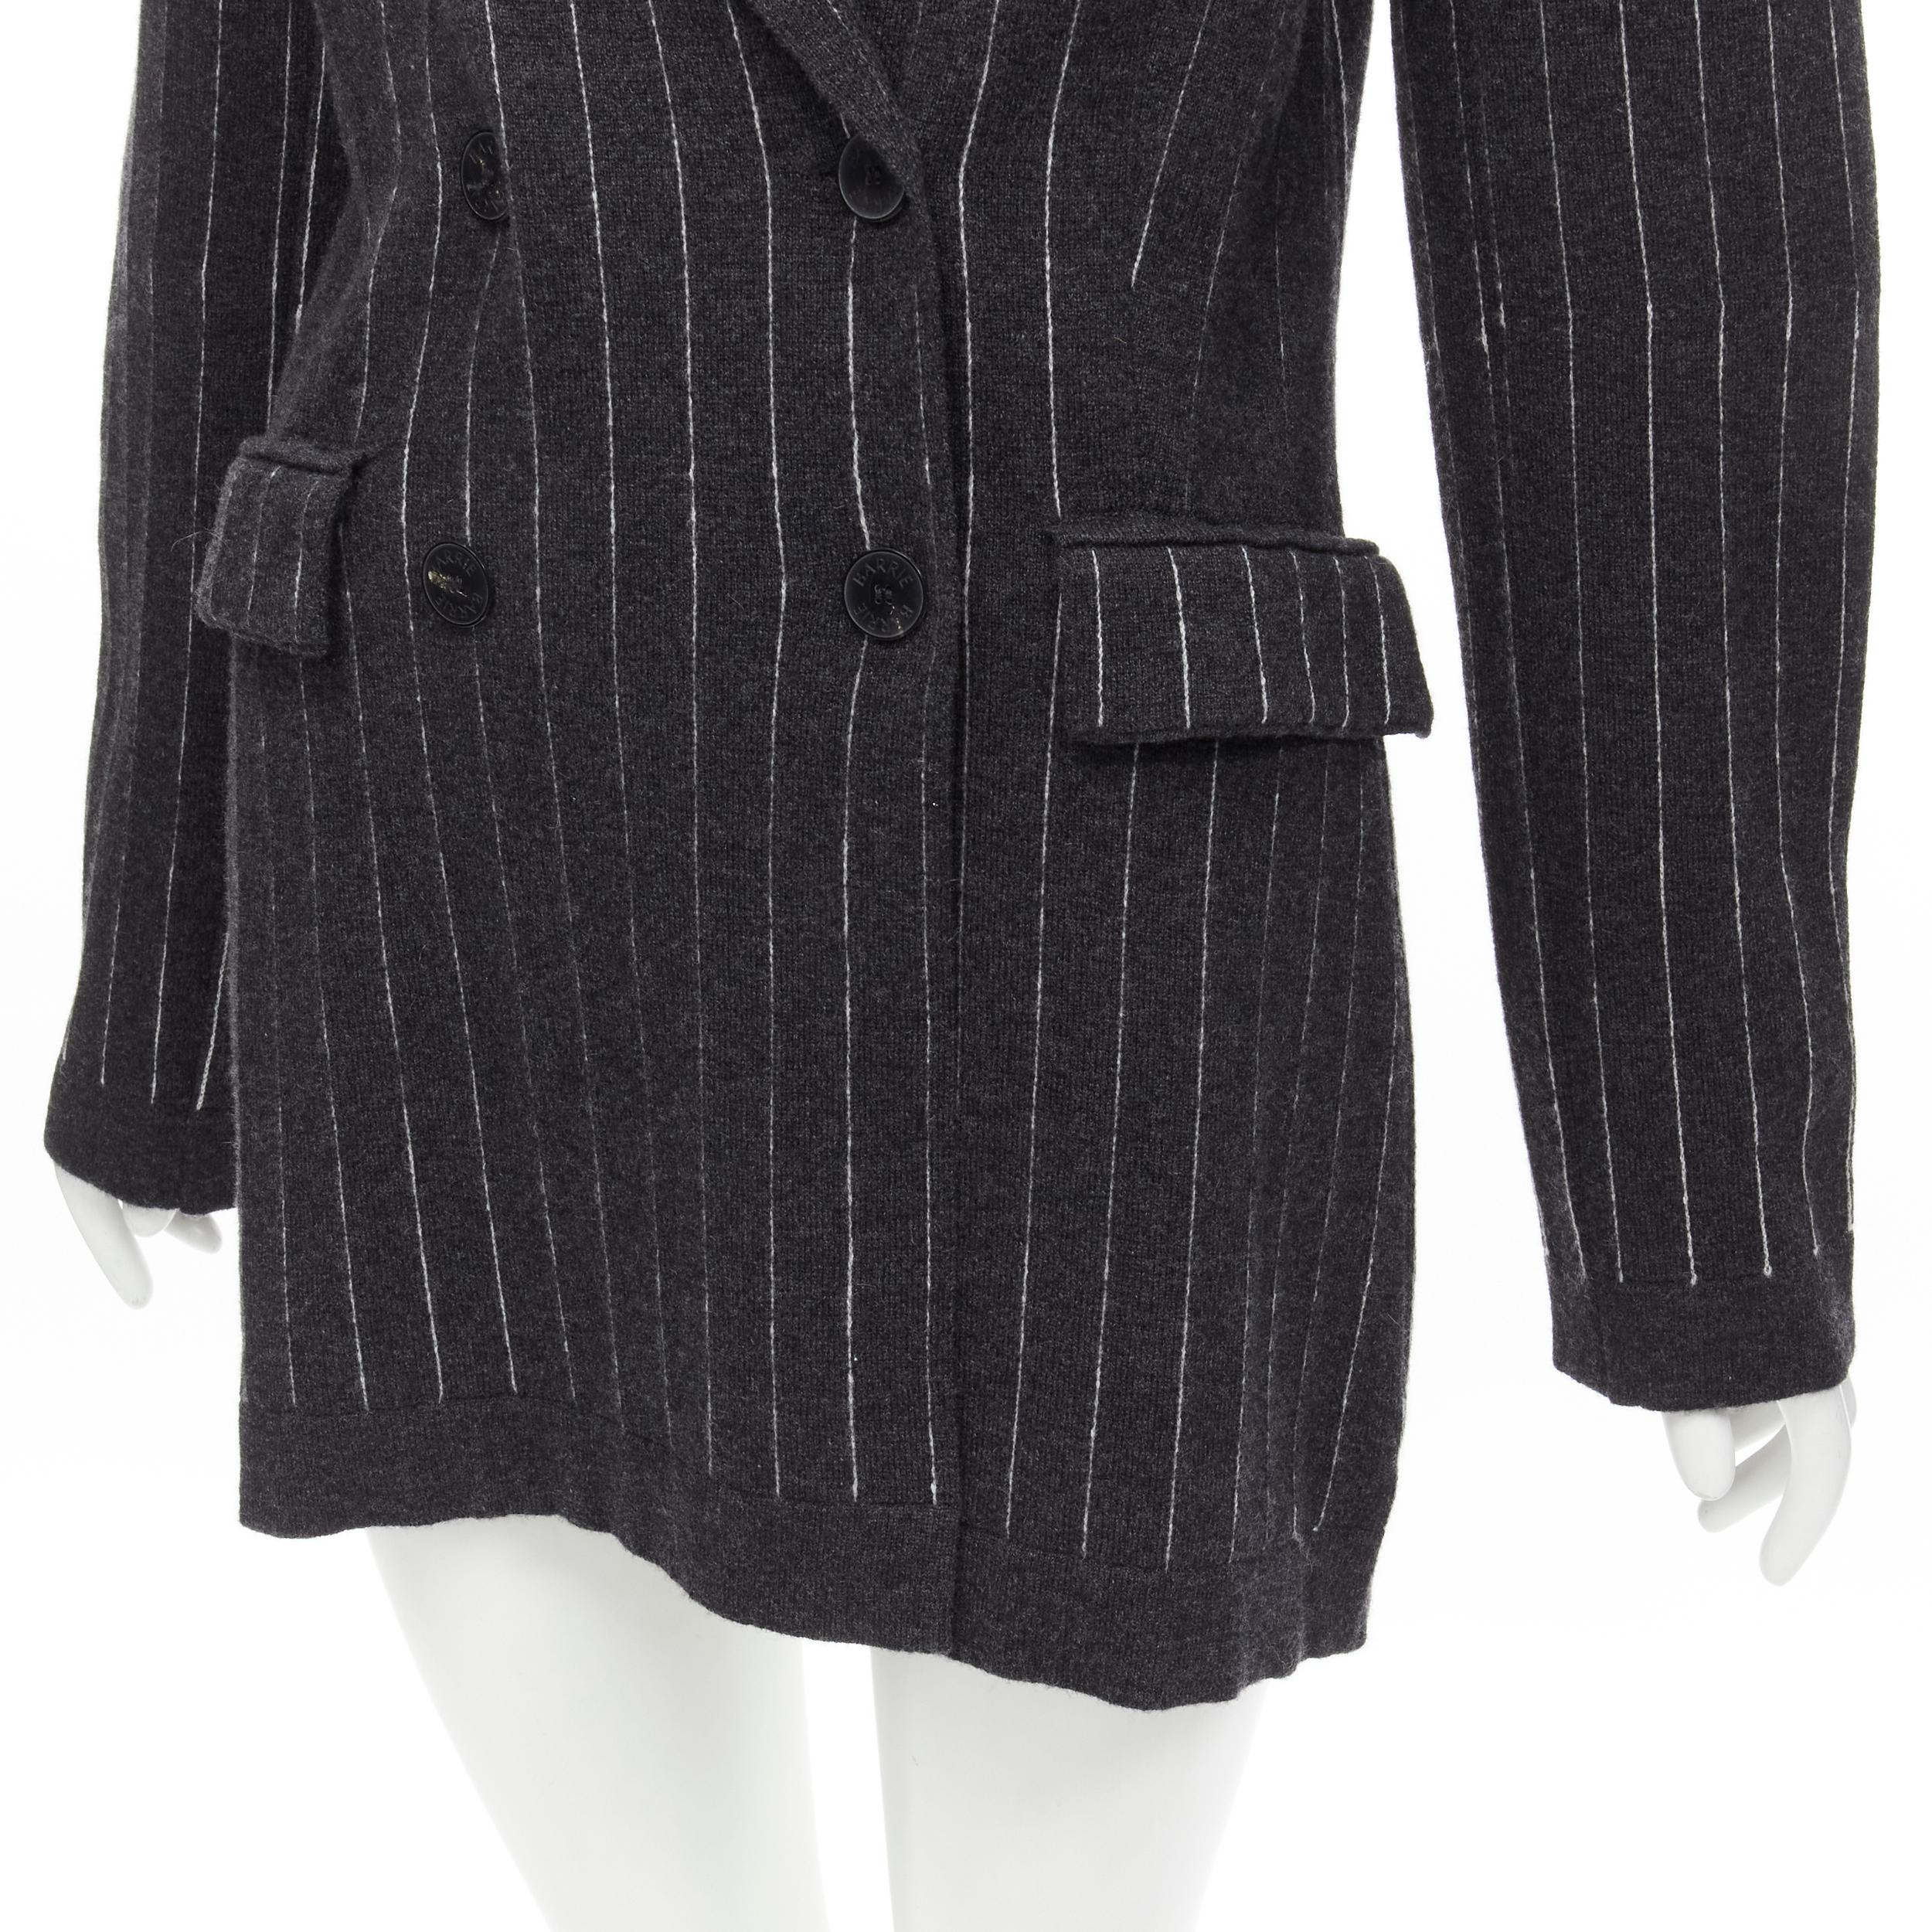 BARRIE 100% pure cashmere dark grey pinstriped double breasted blazer cardigan S For Sale 3